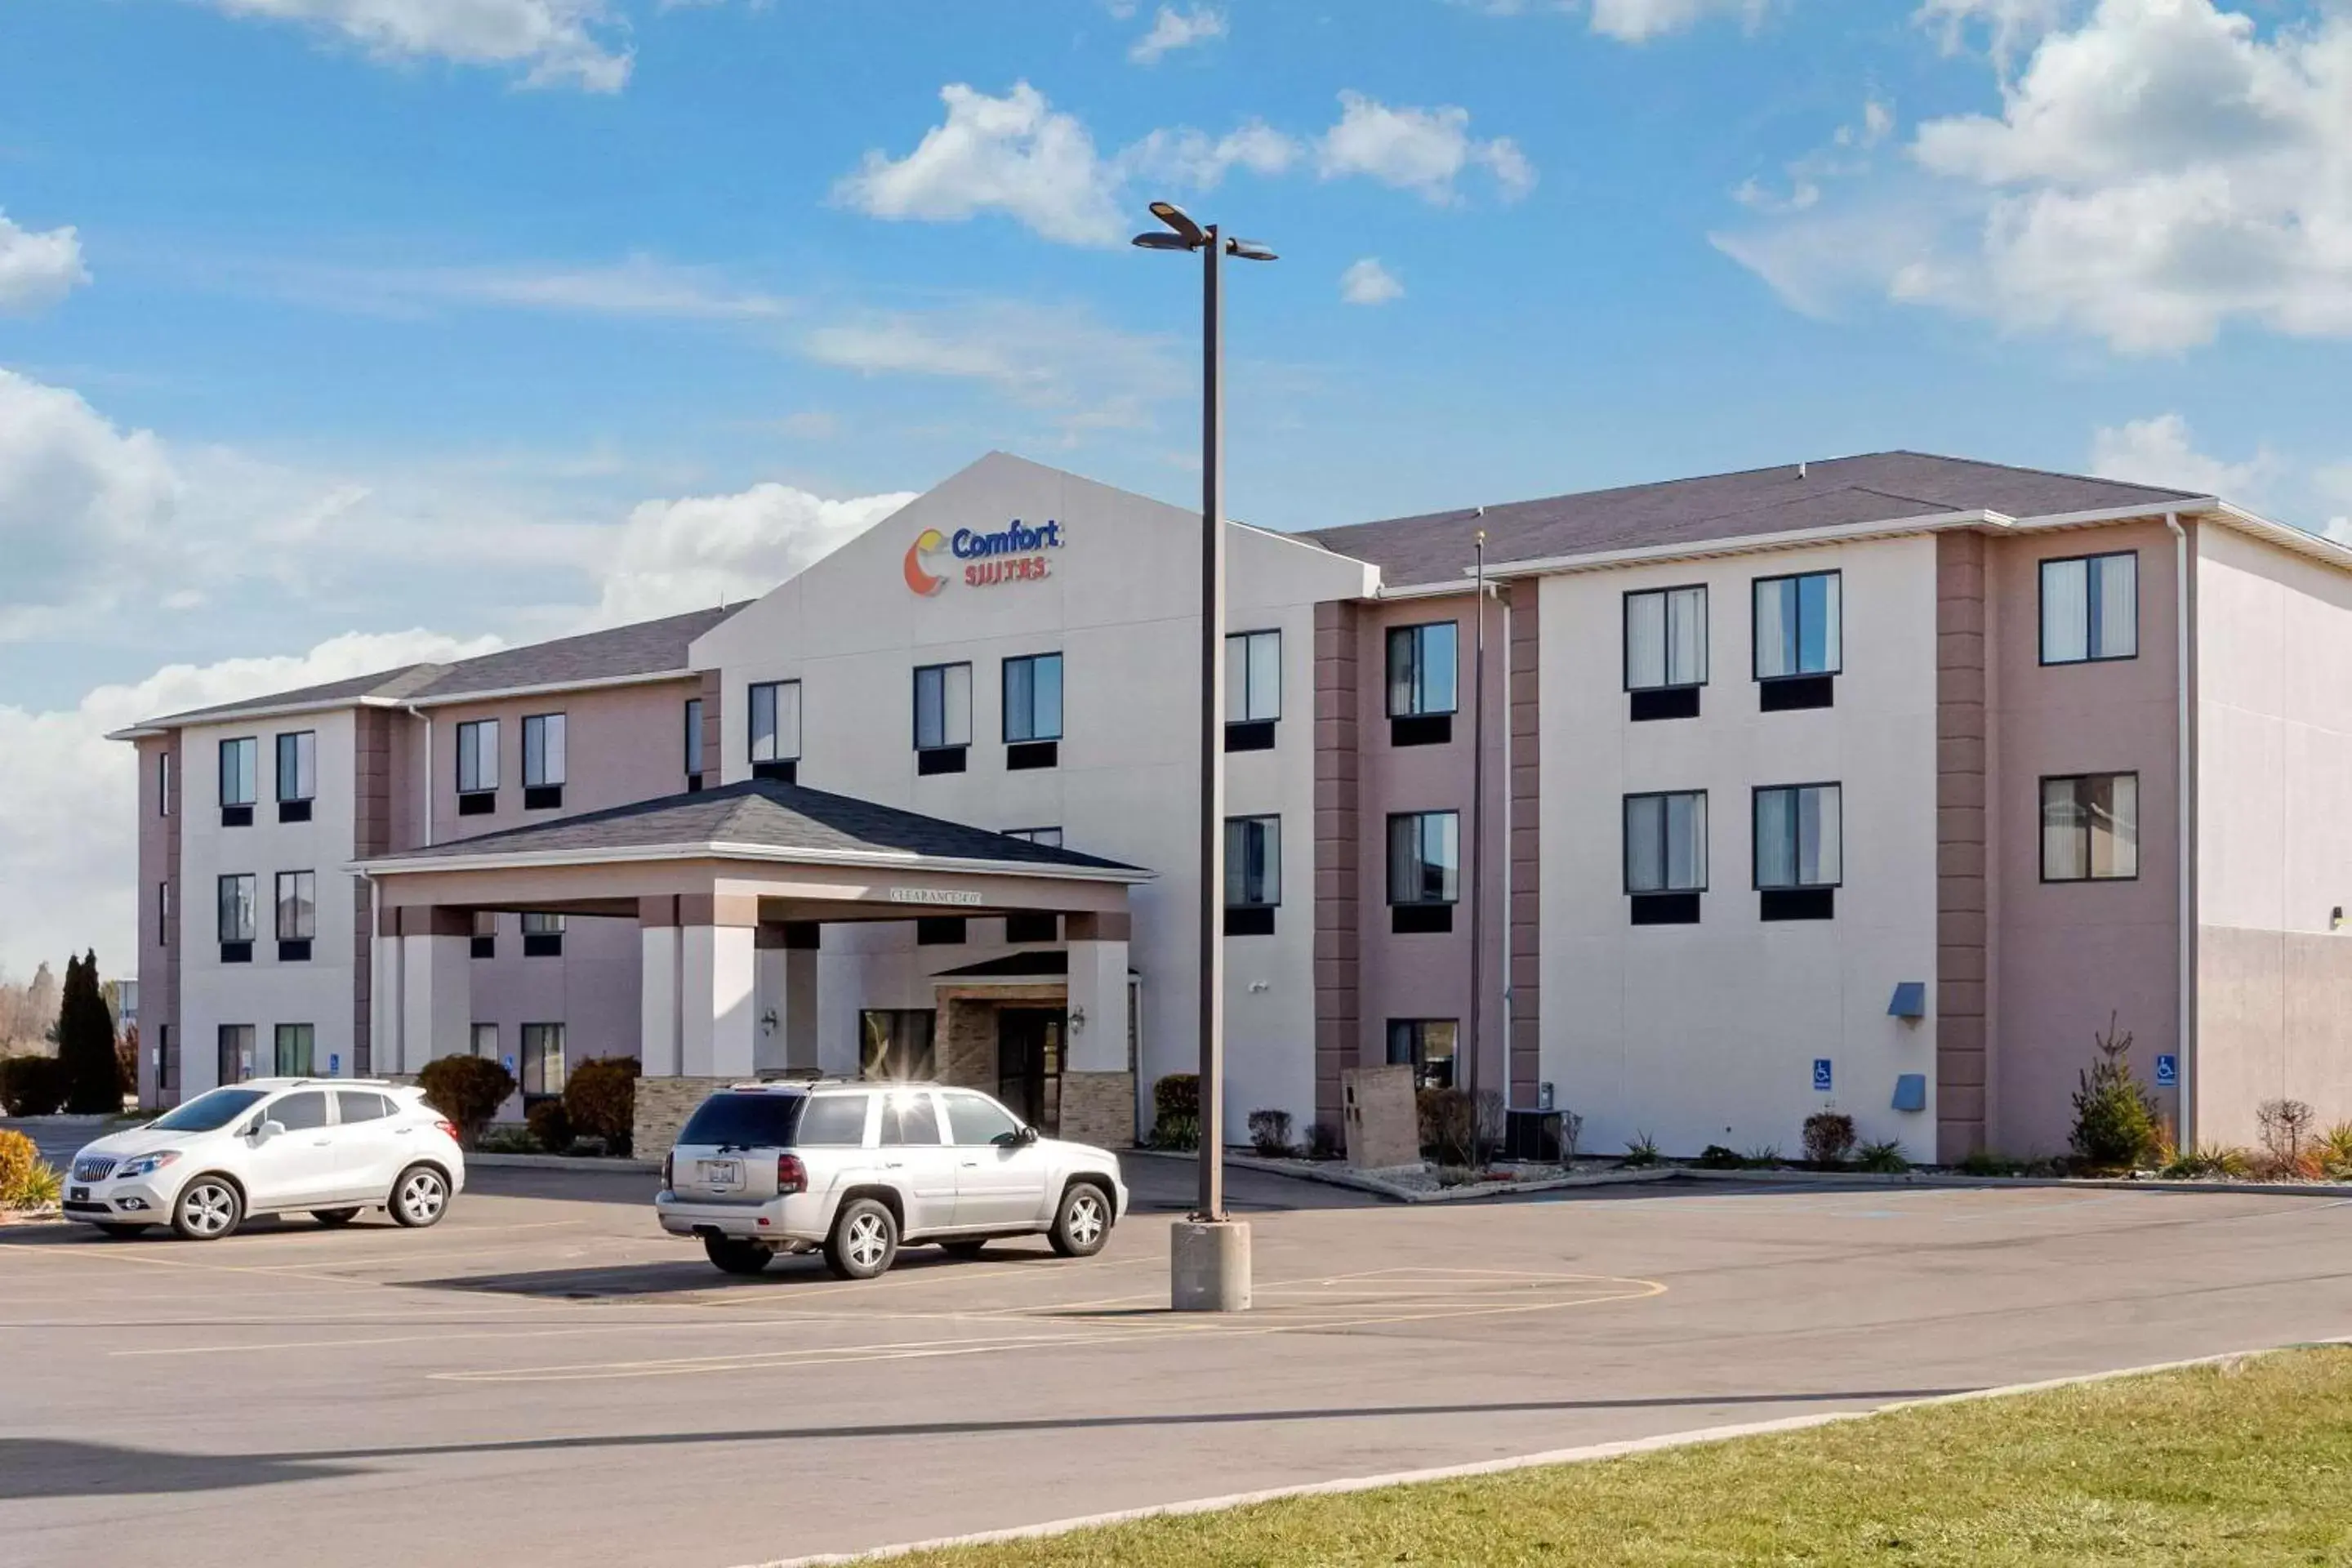 Property Building in Comfort Suites South Haven near I-96